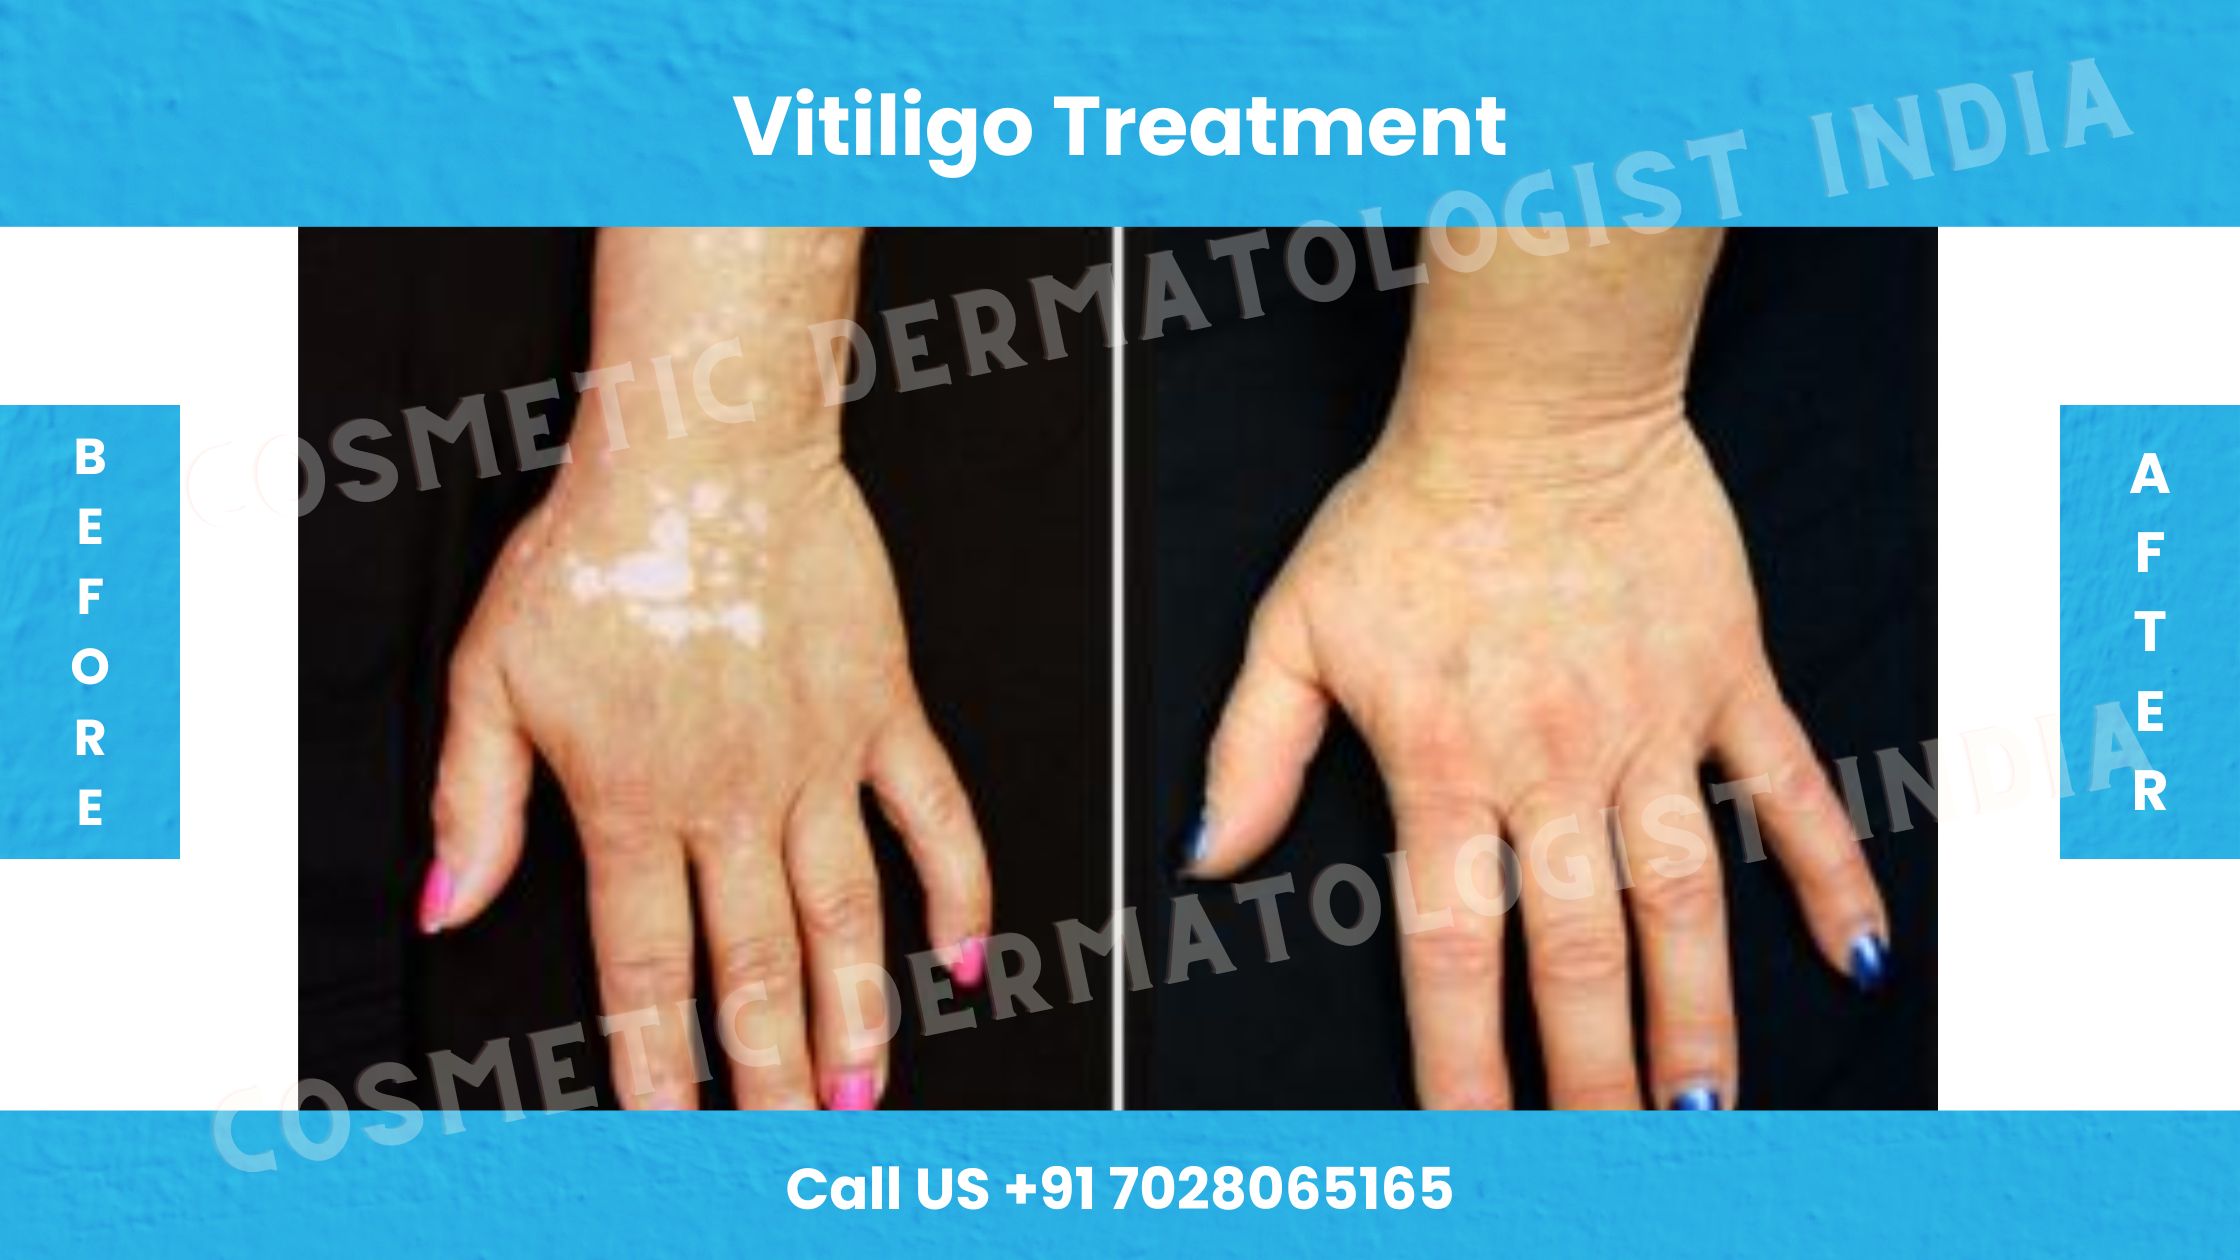 Before and After images of Vitiligo treatment